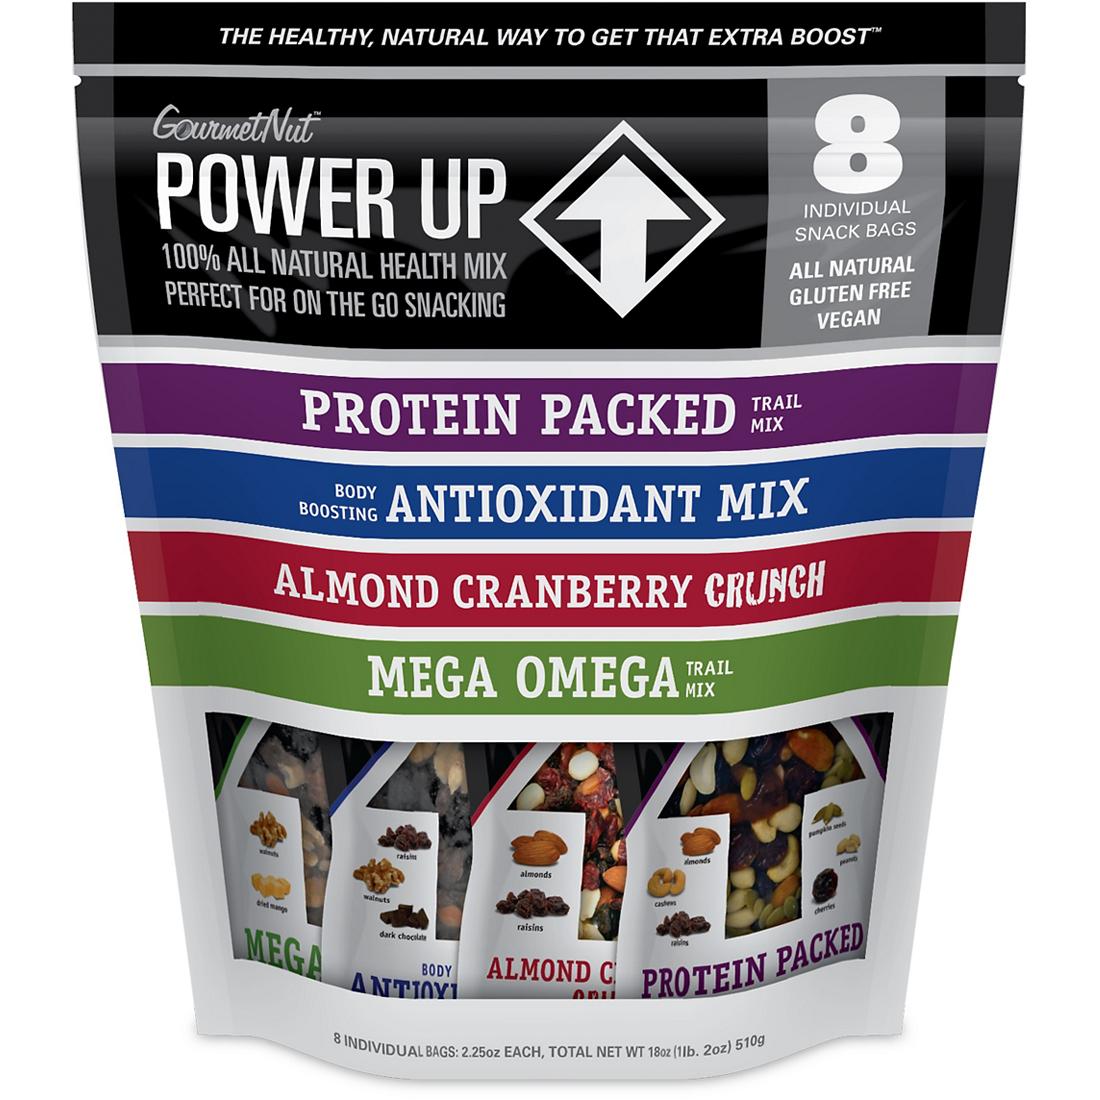 Power Up - Mix 8 individual snack bag